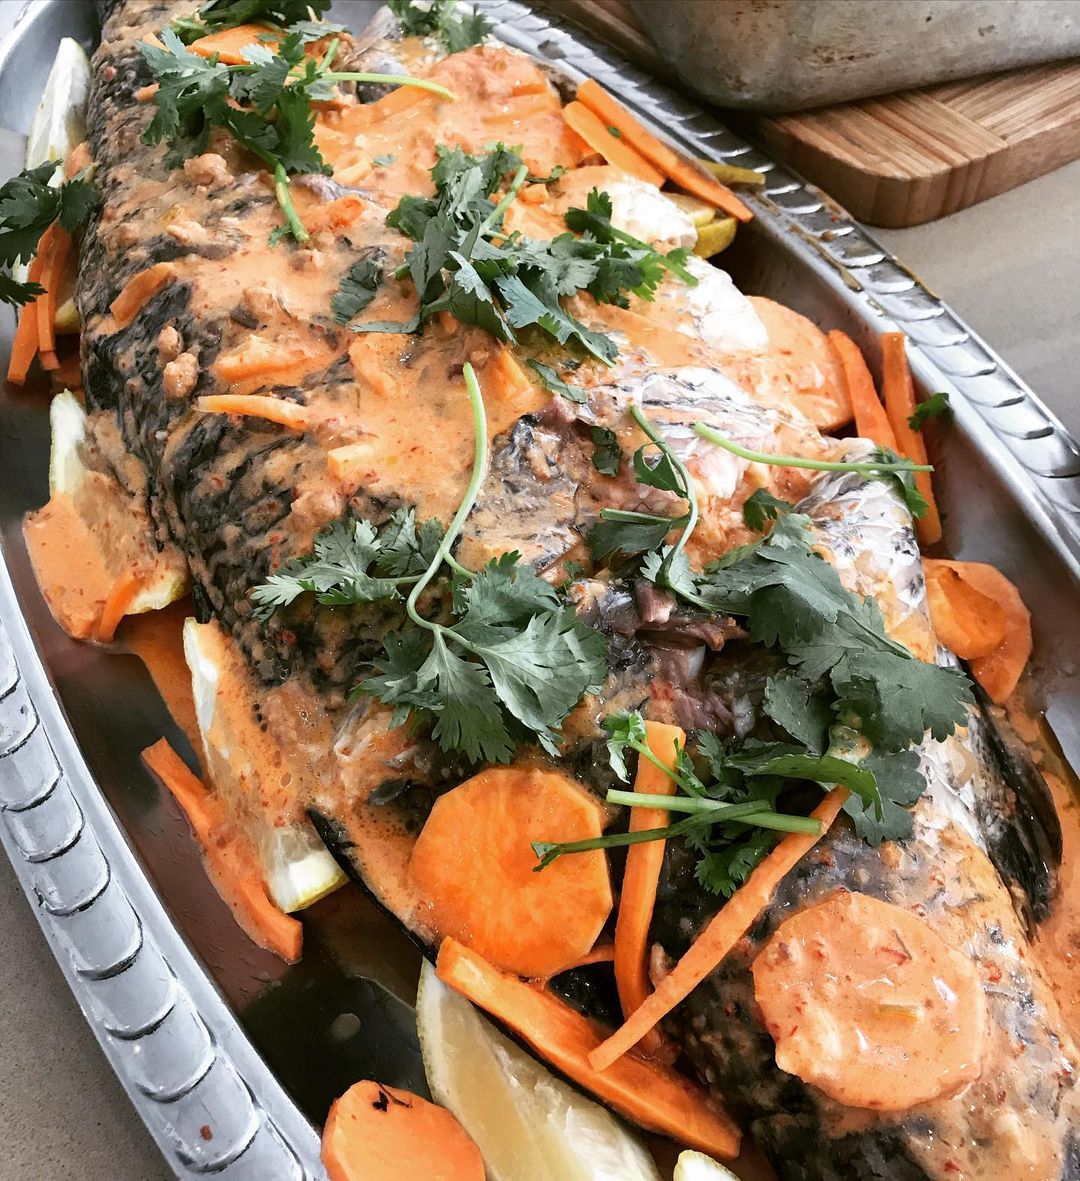 BAKED BARRAMUNDI WITH RED CURRY SAUCE This 25 kilo fresh